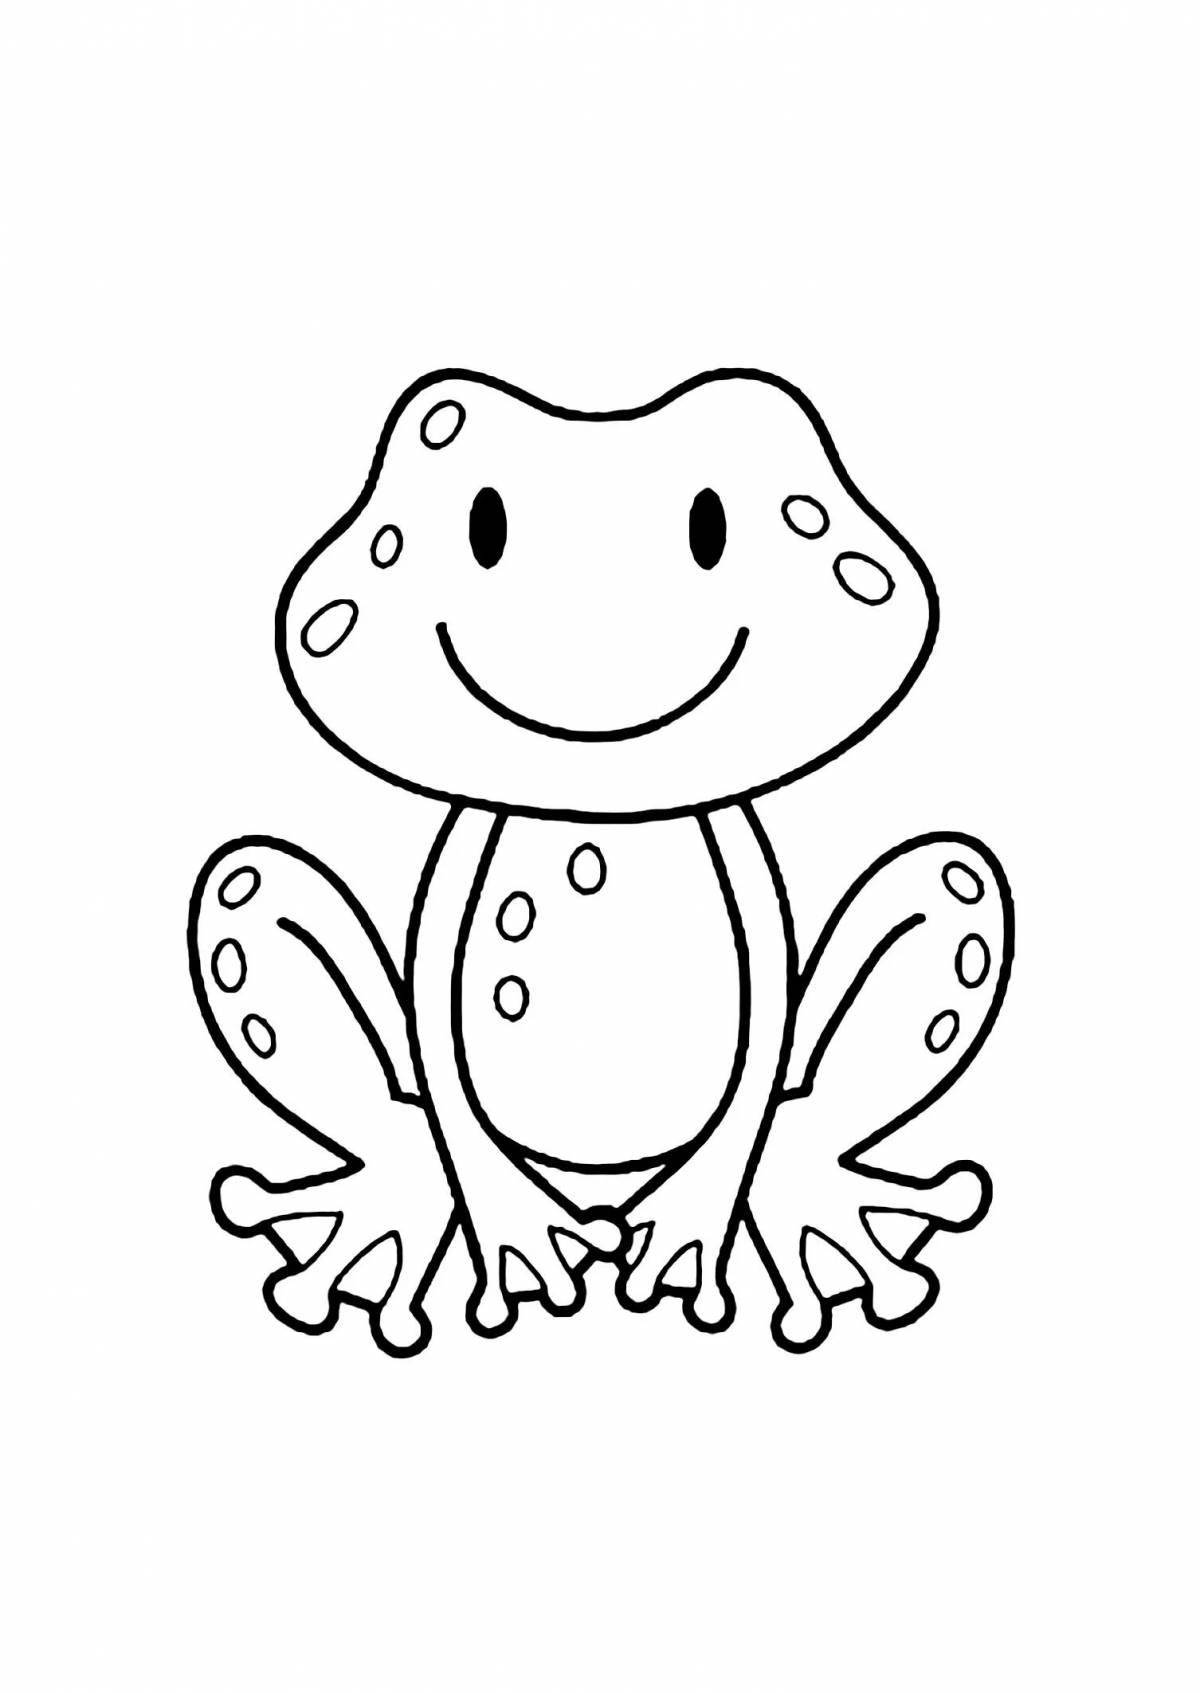 Playful frog drawing for kids